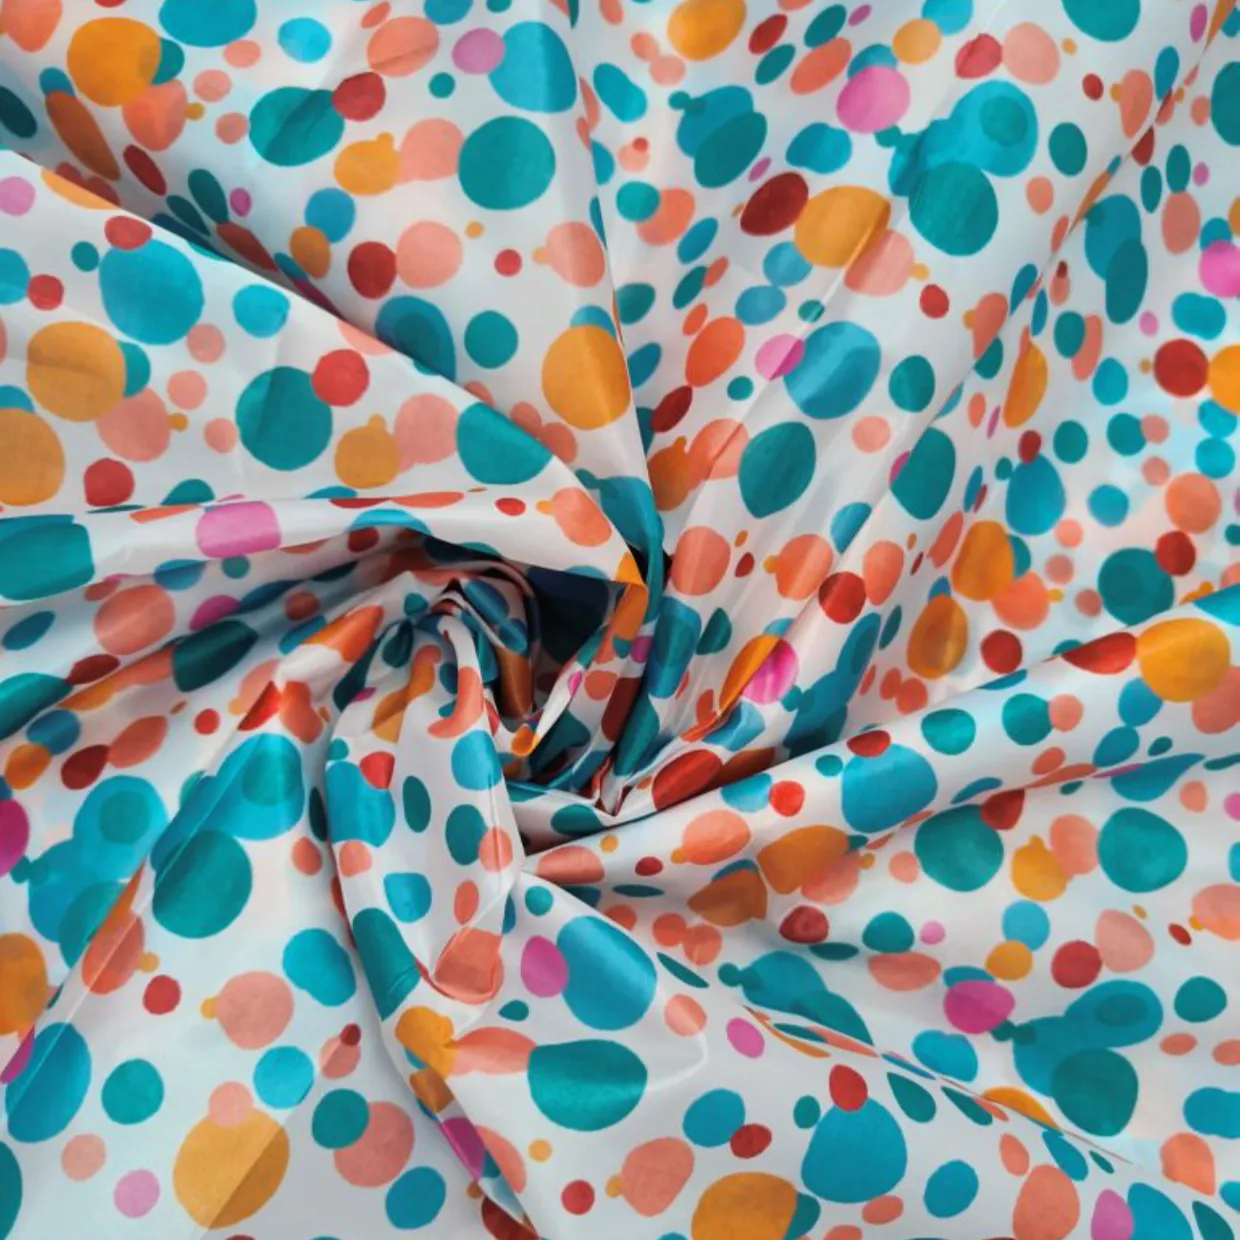 Shiny Silk Satin Digital Print Fabric High Quality Fabric By The Yard Unique Designs Stain Fabric